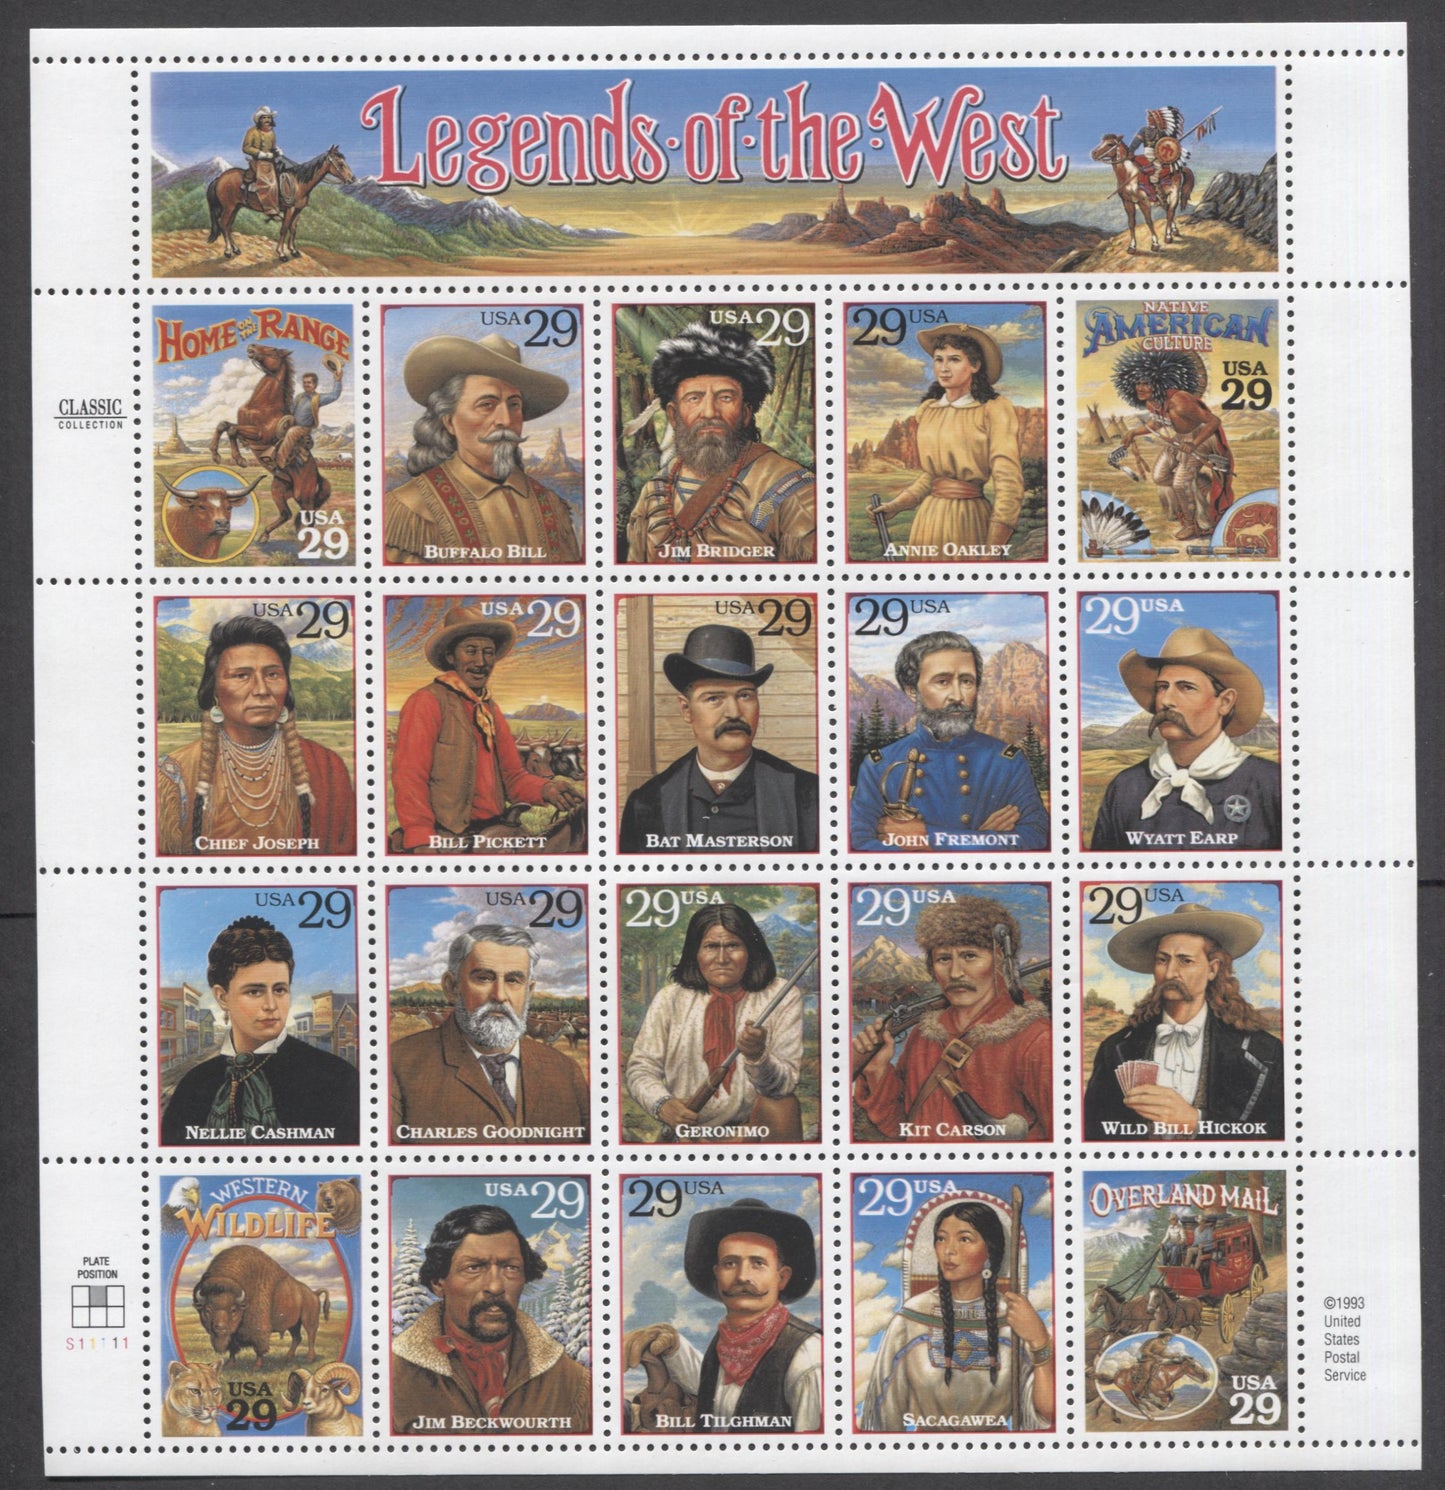 Lot 55 United States SC#2869 29c Multicolored 1994 Legends Of The West Issue, A VFNH Souvenir Sheet Of 20, Click on Listing to See ALL Pictures, 2017 Scott Cat. $15